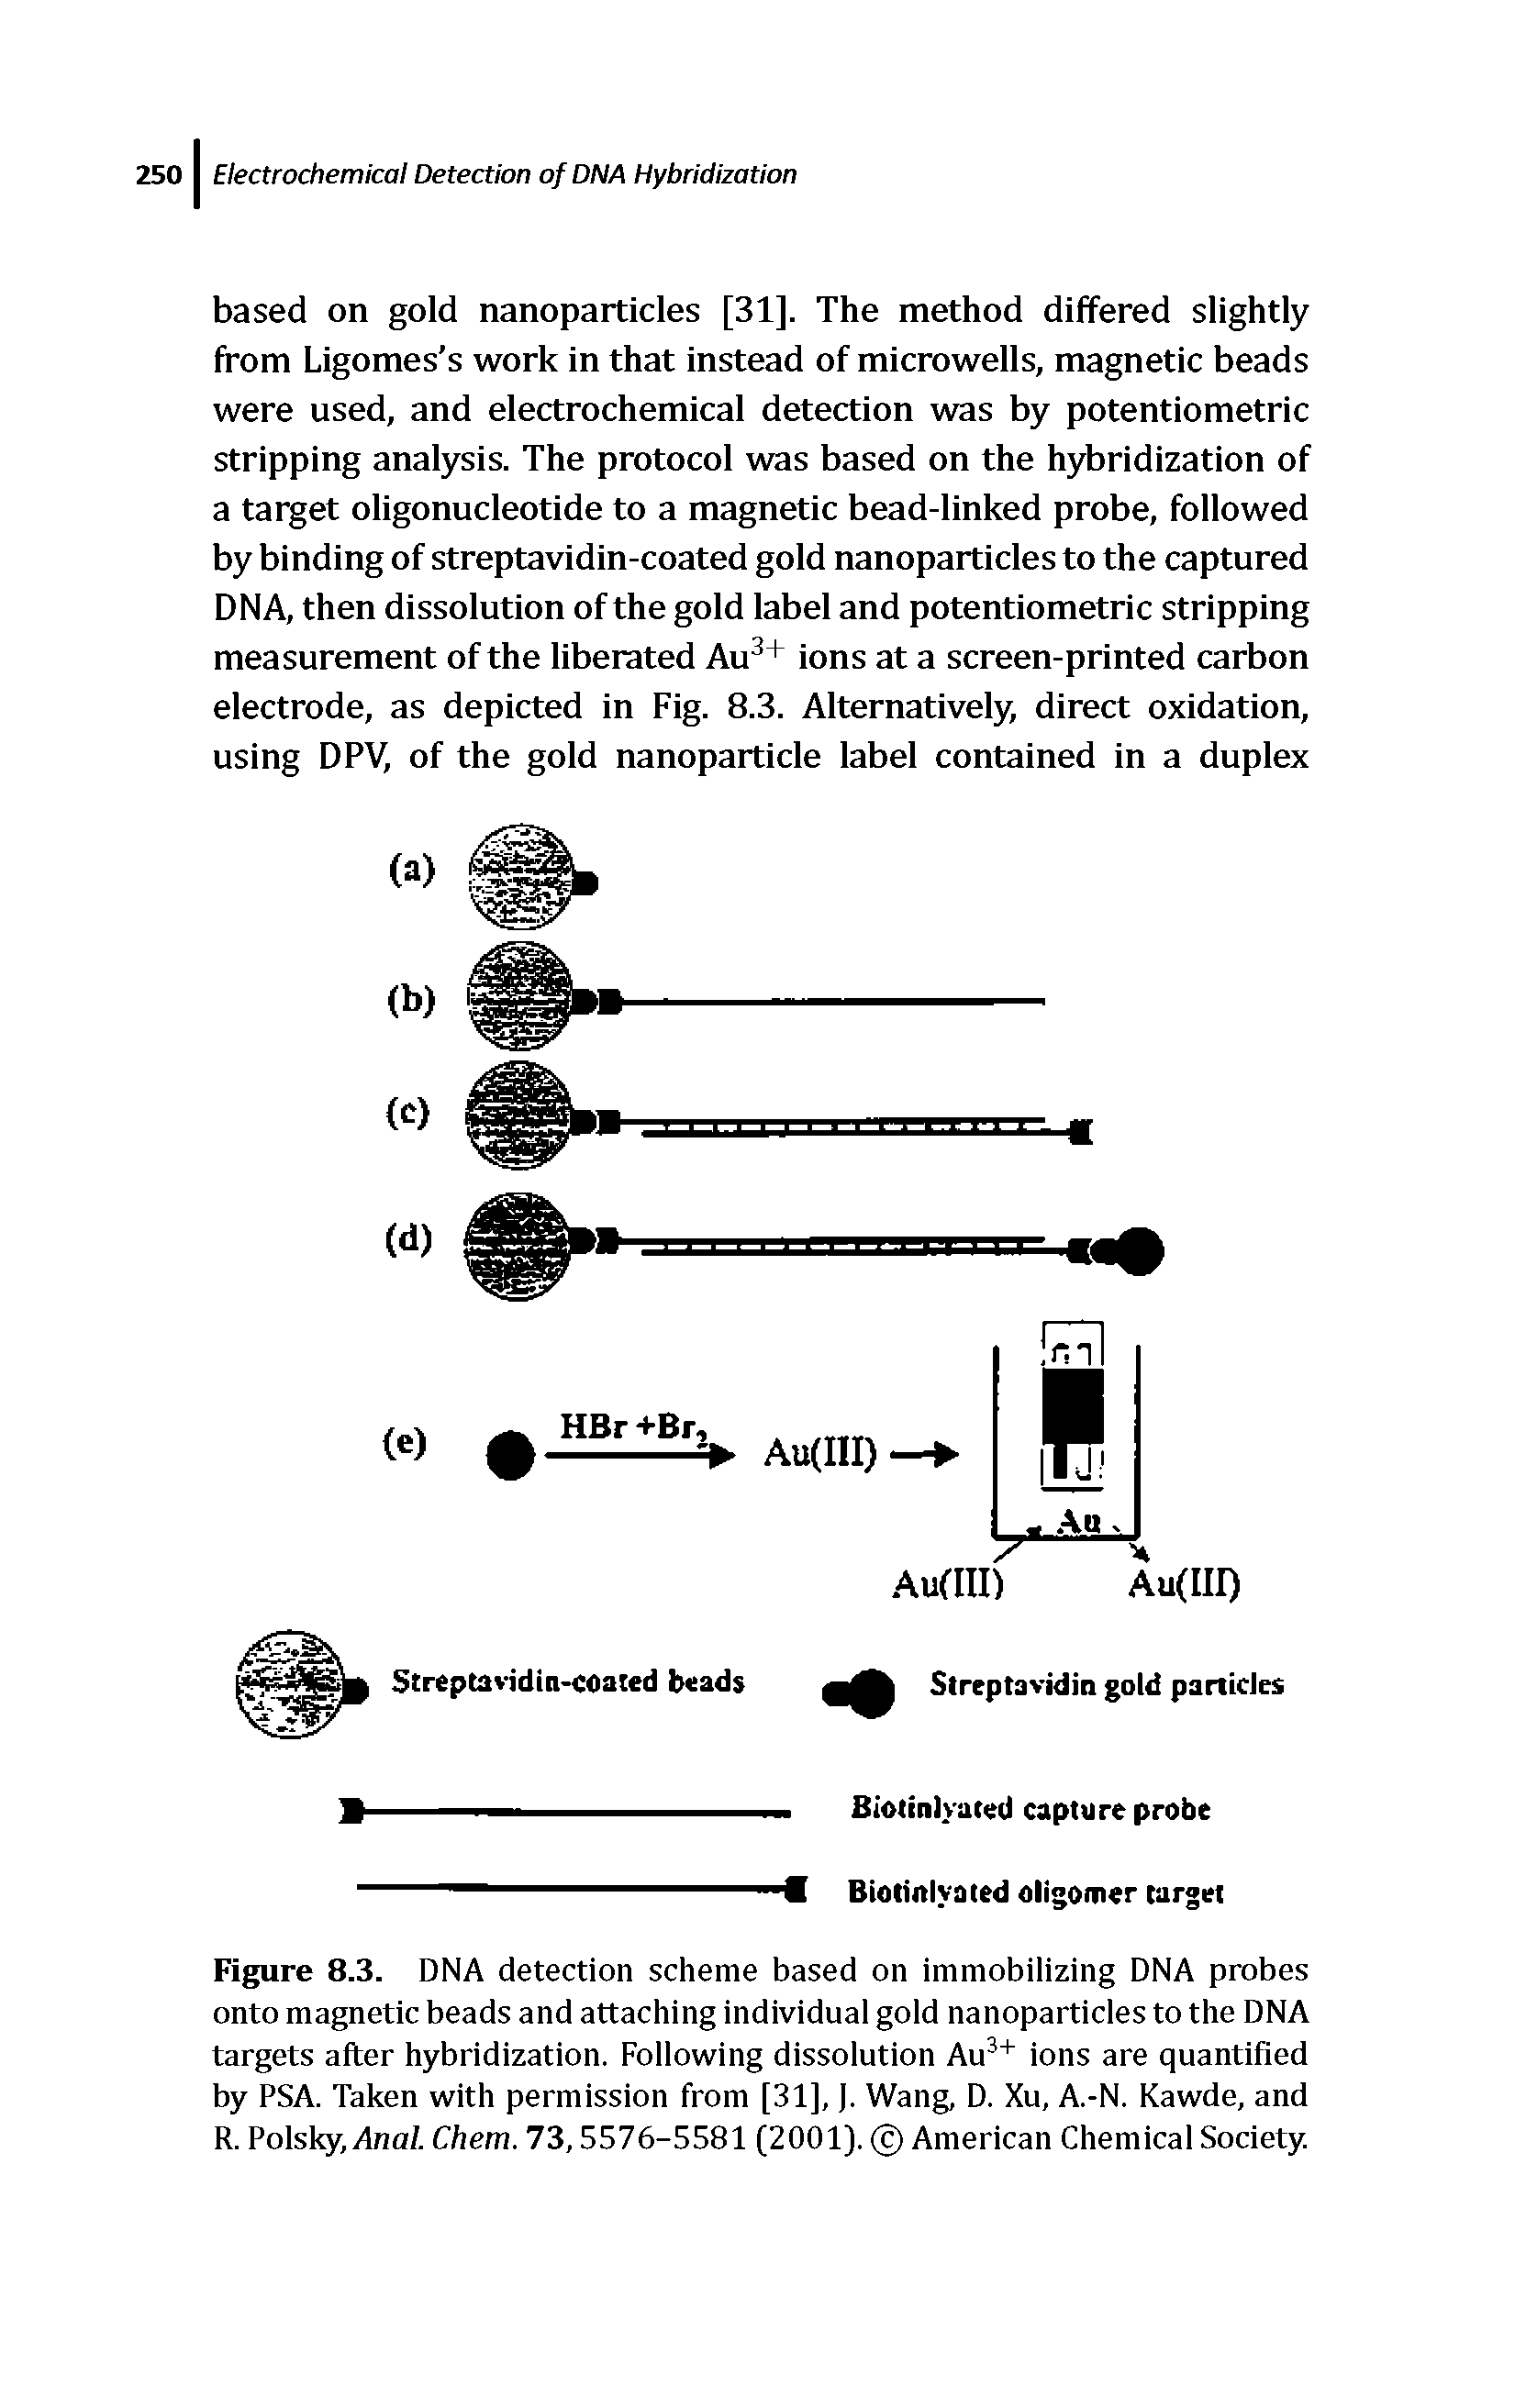 Figure 8.3. DNA detection scheme based on immobilizing DNA probes onto magnetic beads and attaching individual gold nanoparticles to the DNA targets after hybridization. Following dissolution Au ions are quantified by PSA. Taken with permission from [31],). Wang, D. Xu, A.-N. Kawde, and R. Polslqi, Anai Chem. 73,5576-5581 (2001). American Chemical Society.